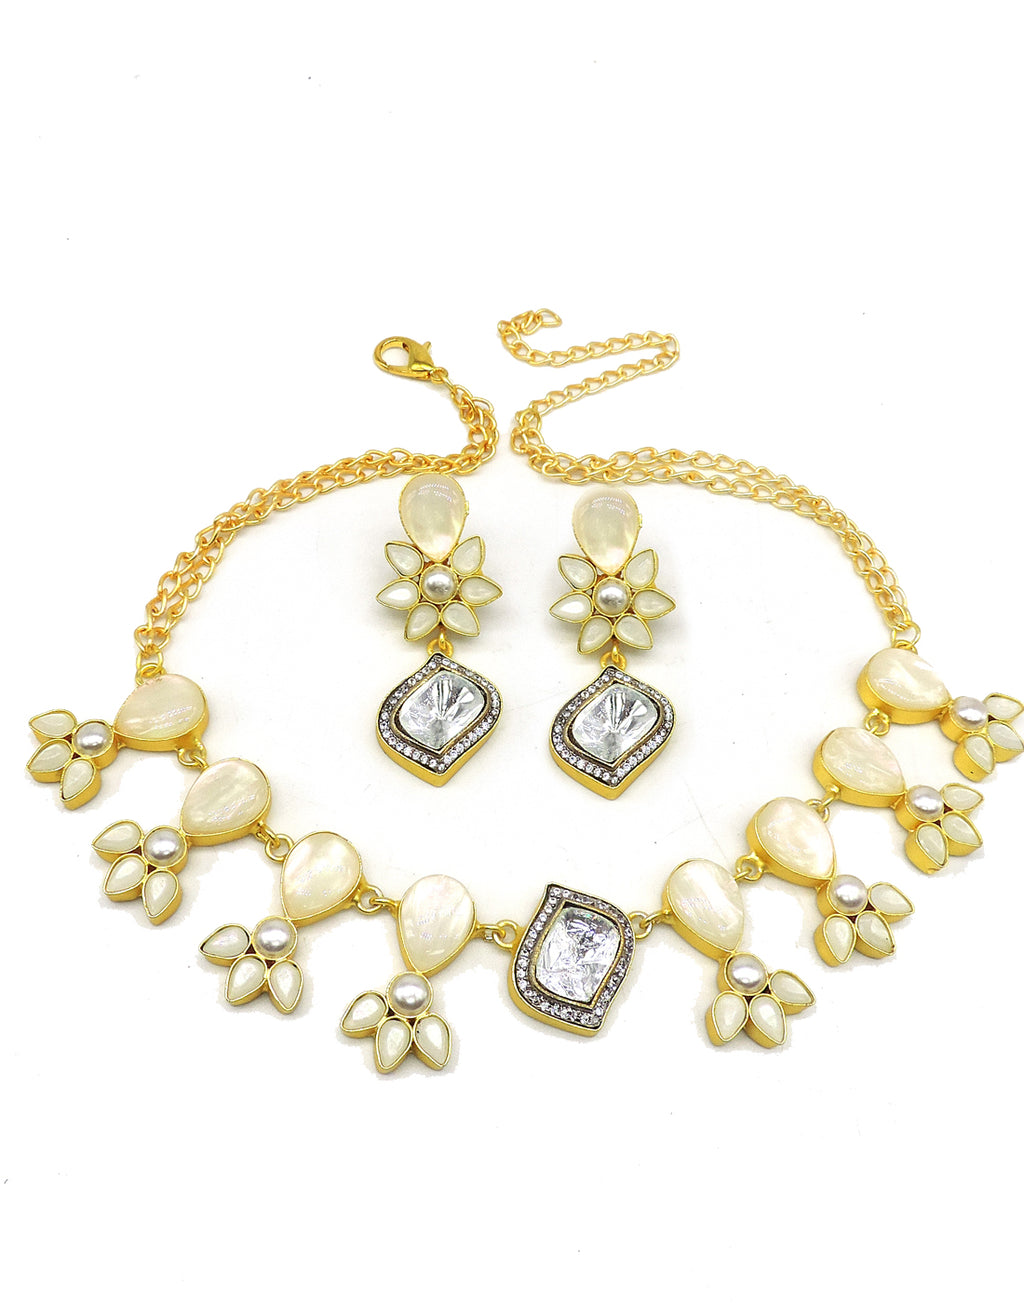 Crystal & Shell Necklace - Statement Necklaces - Gold-Plated & Hypoallergenic Jewellery - Made in India - Dubai Jewellery - Dori